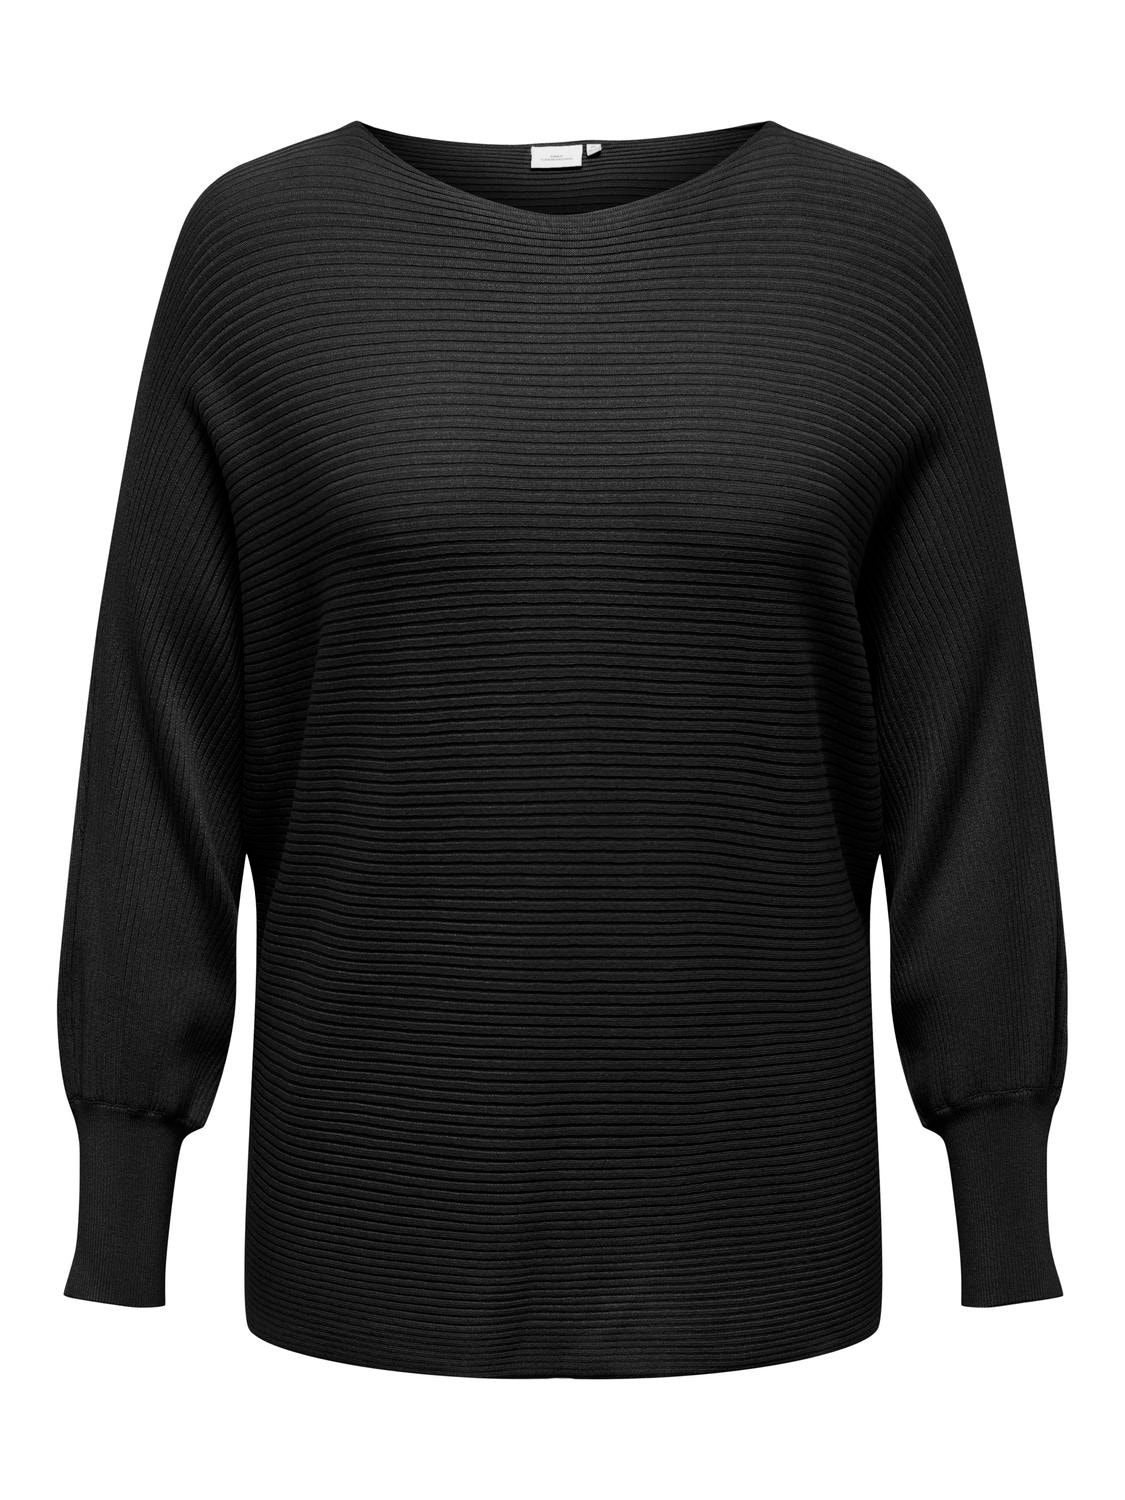 ONLY Curvy o-neck knitted pullover -Black - 15306803